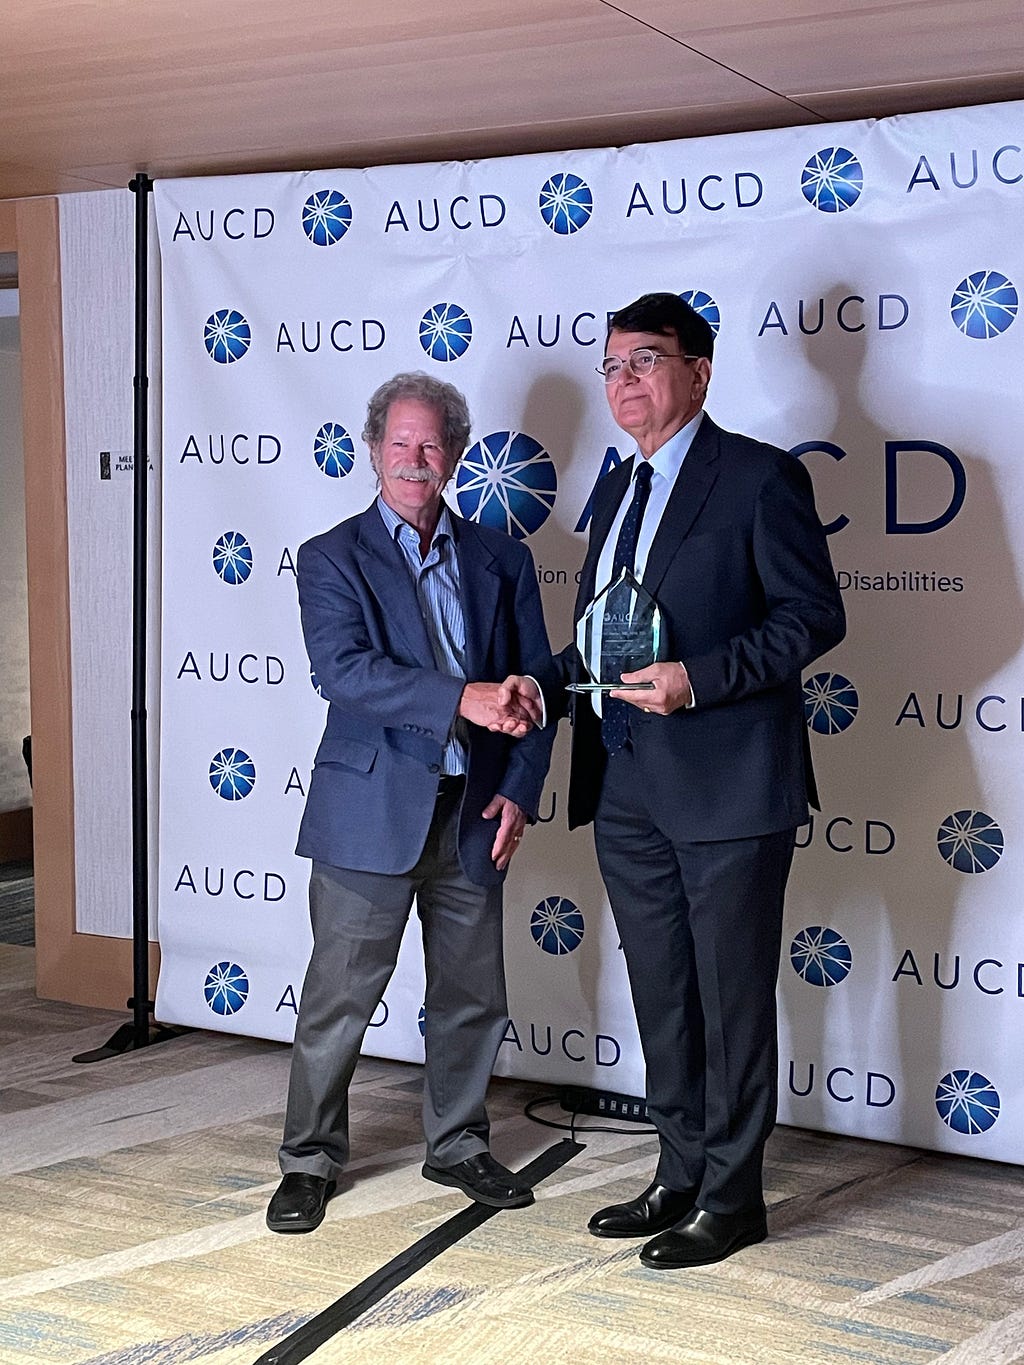 Two white men shaking hands in front of a screen displaying the words “AUCD”; one of the men is holding an award.